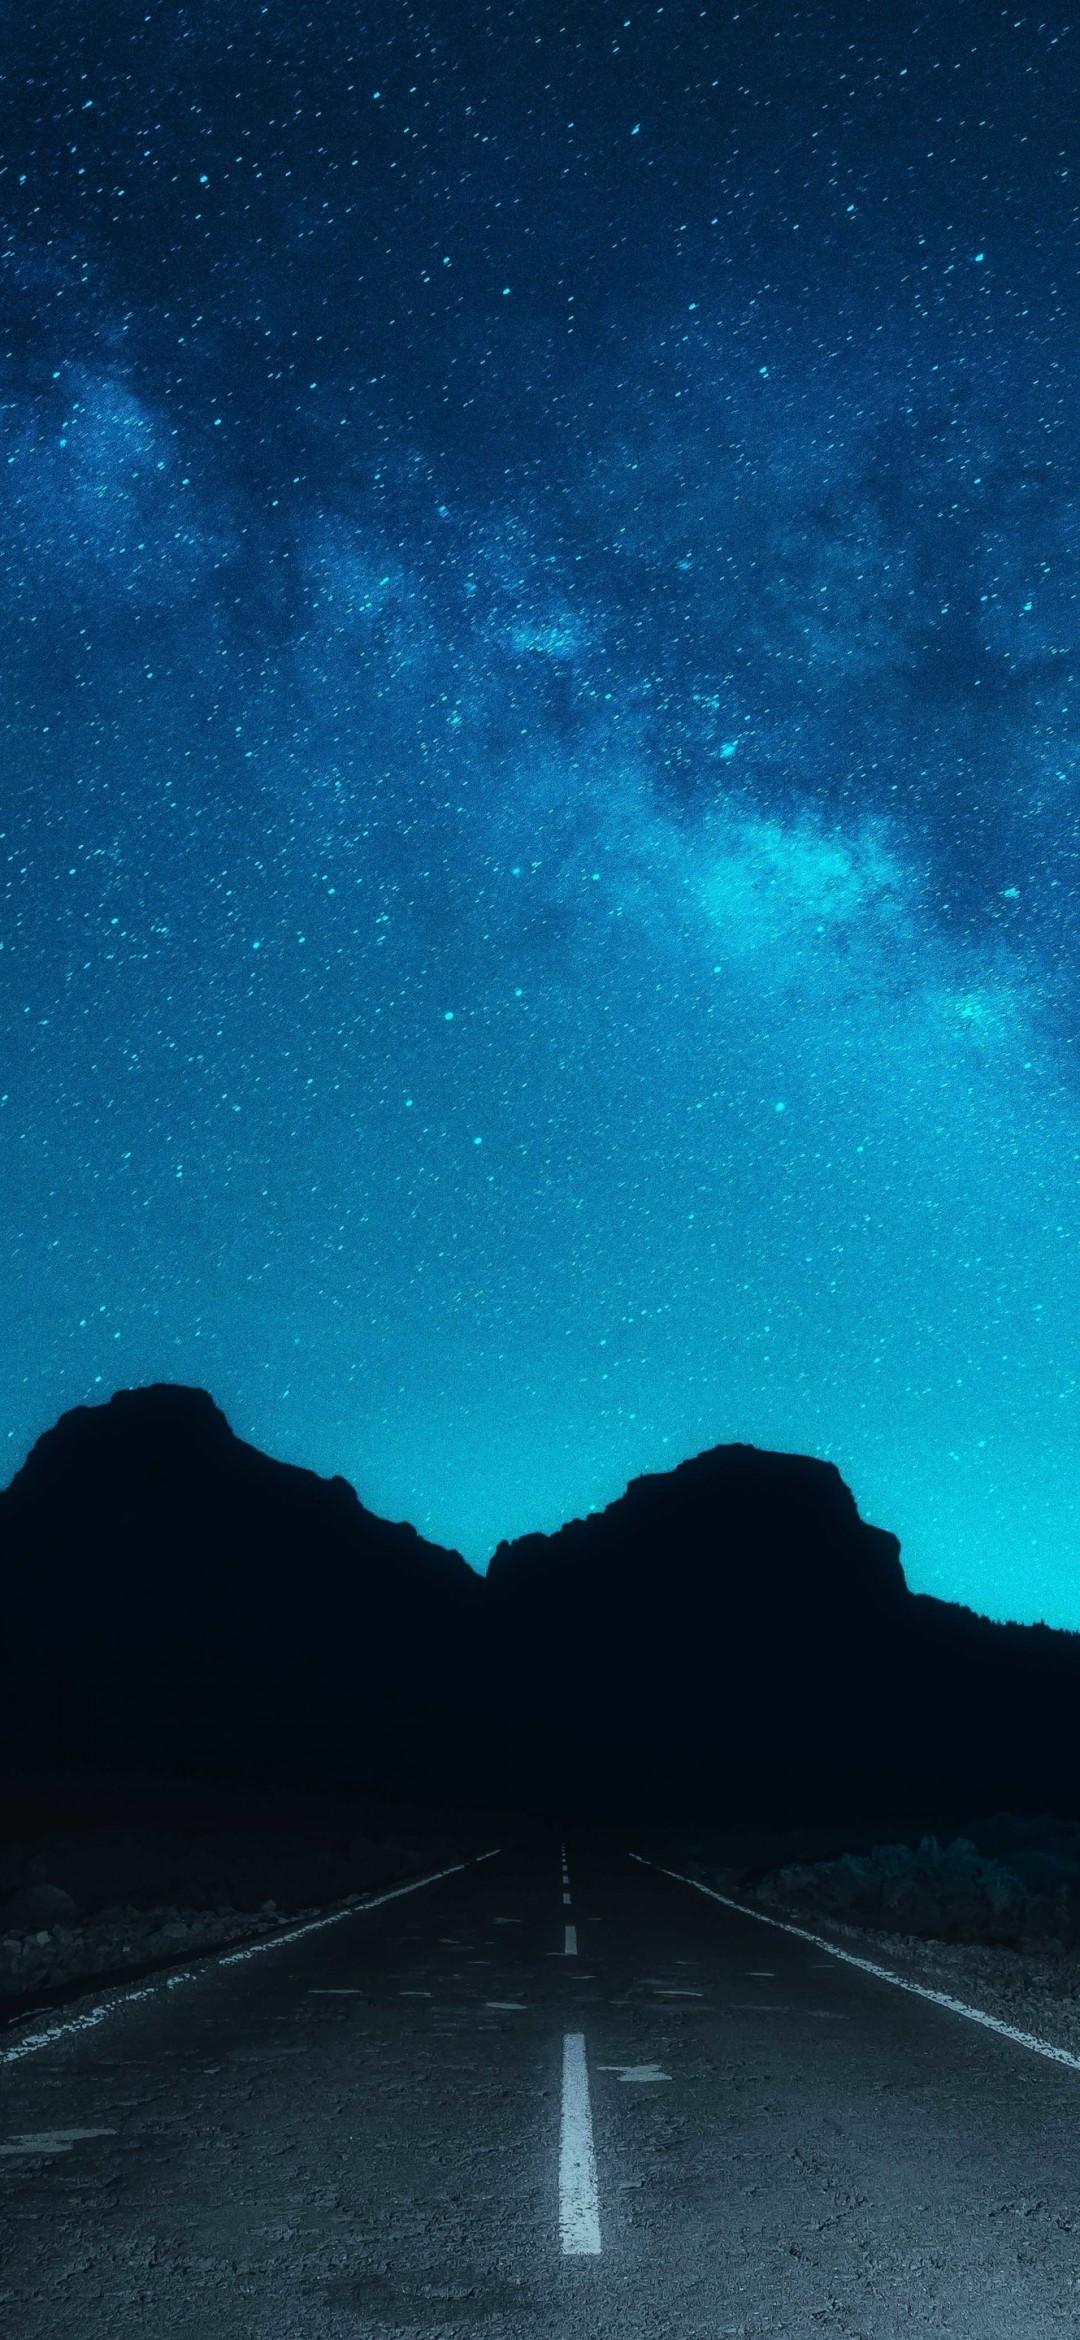 Download 1080x2340 Blue Night, Road, Stars, Clouds, Mood, Mountain